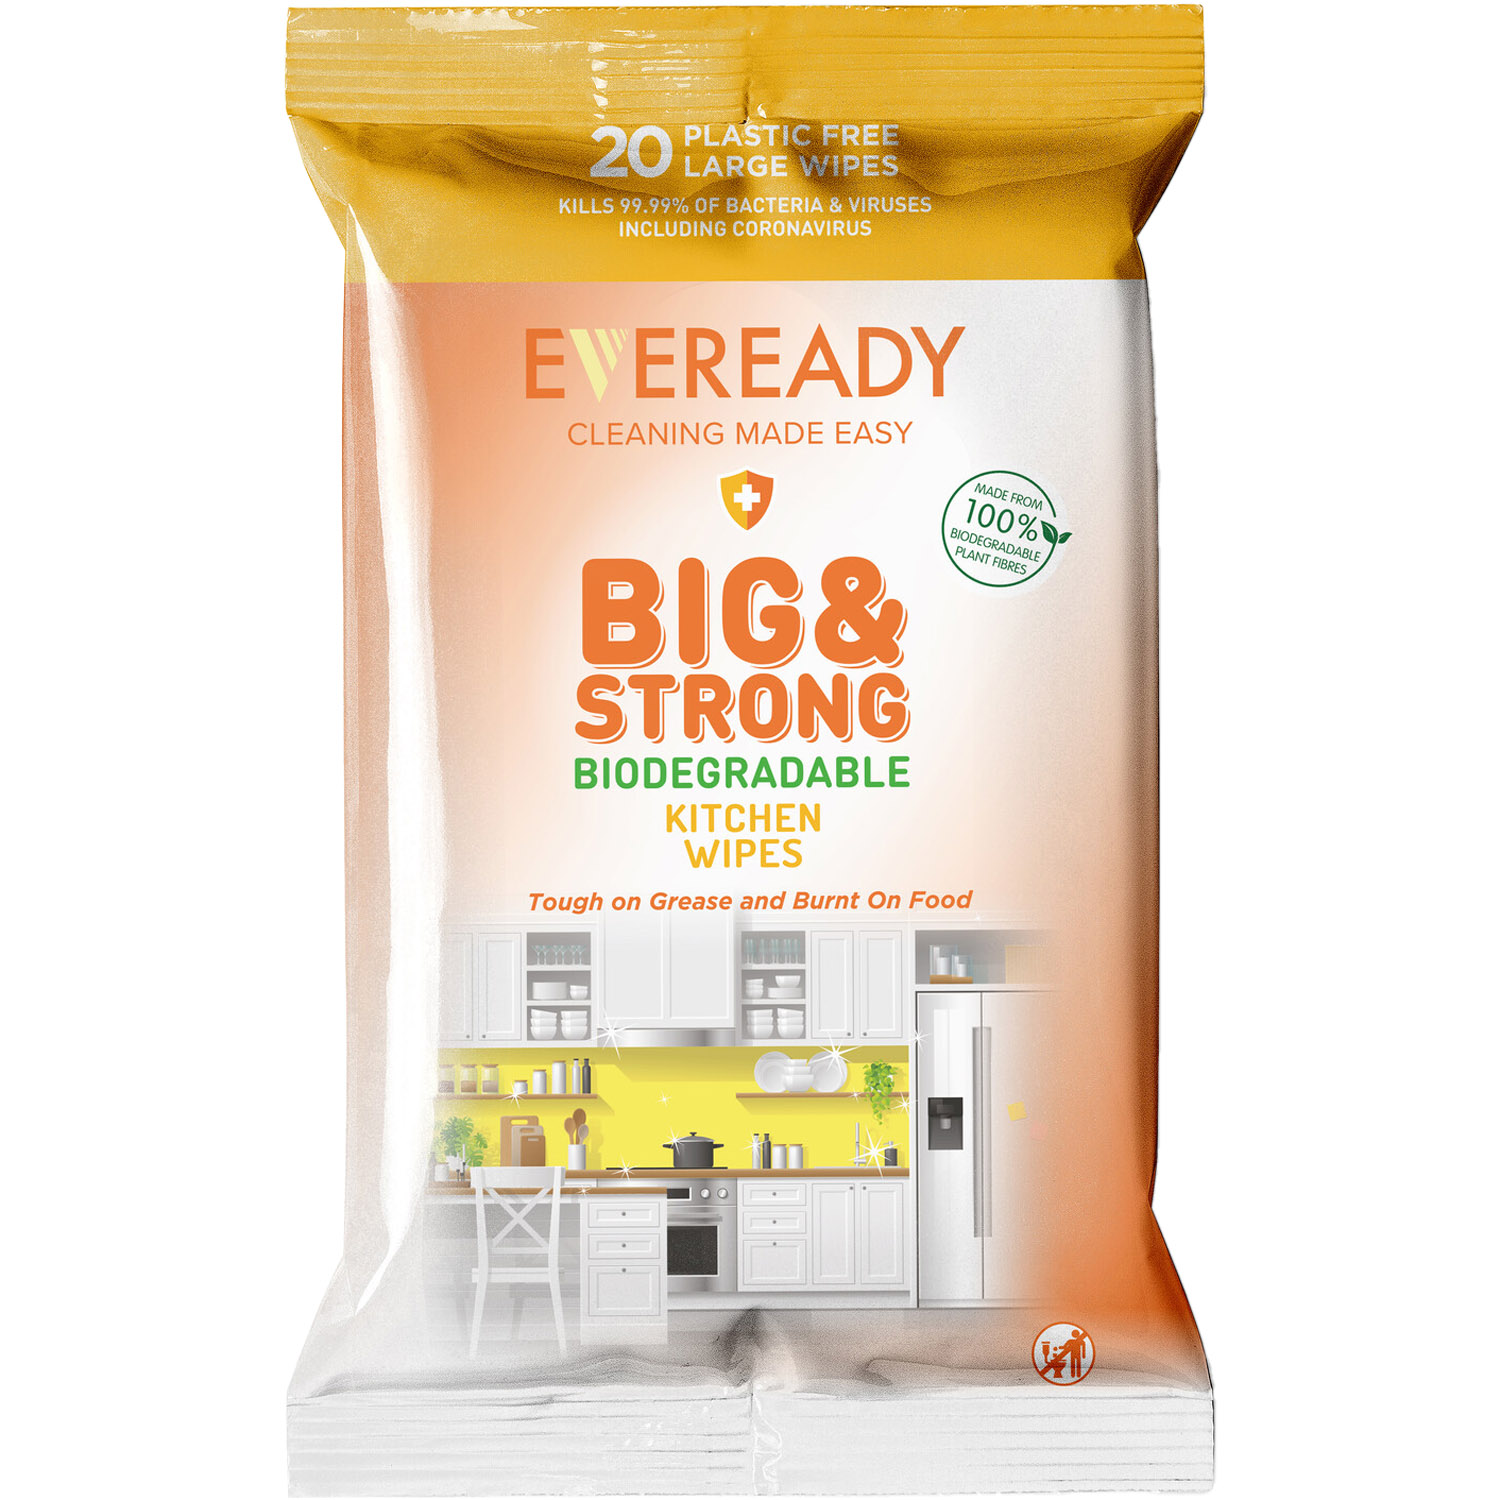 Eveready Big & Strong Biodegradable Kitchen Wipe 20 Pack Image